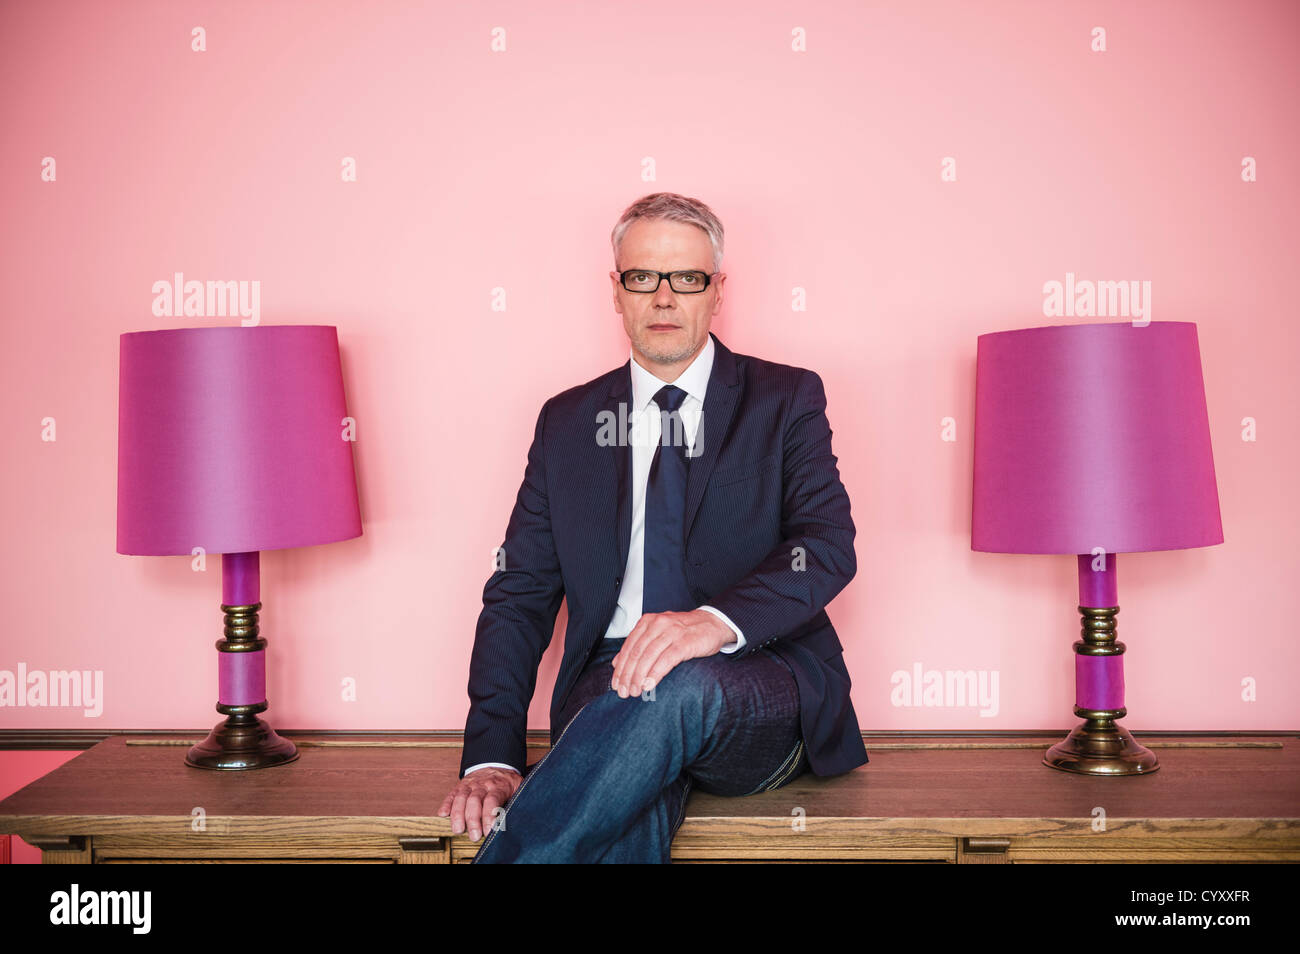 Germany, Stuttgart, Businessman sitting on sideboard with lamps, smiling, portrait Stock Photo